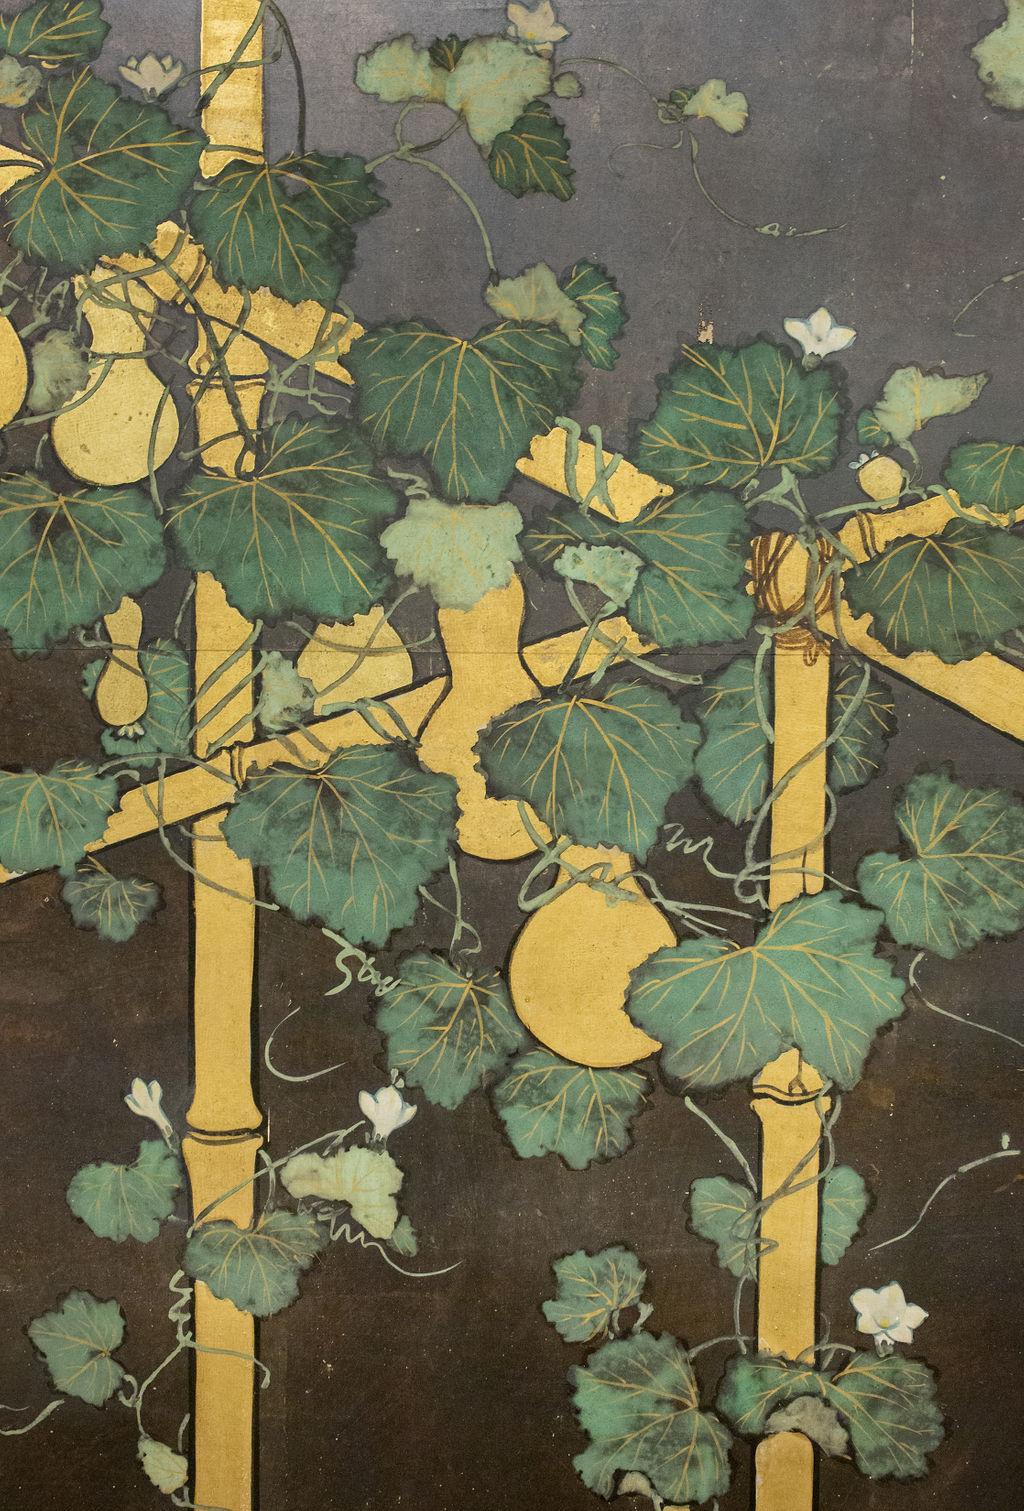 In Japan, gardeners train their gourds and squashes up an arbor to create a perfect gourd shape. Gourds were used for containers and the more perfect the shape, the more desirable the container. Rimpa School painting with gold leaf gourds and